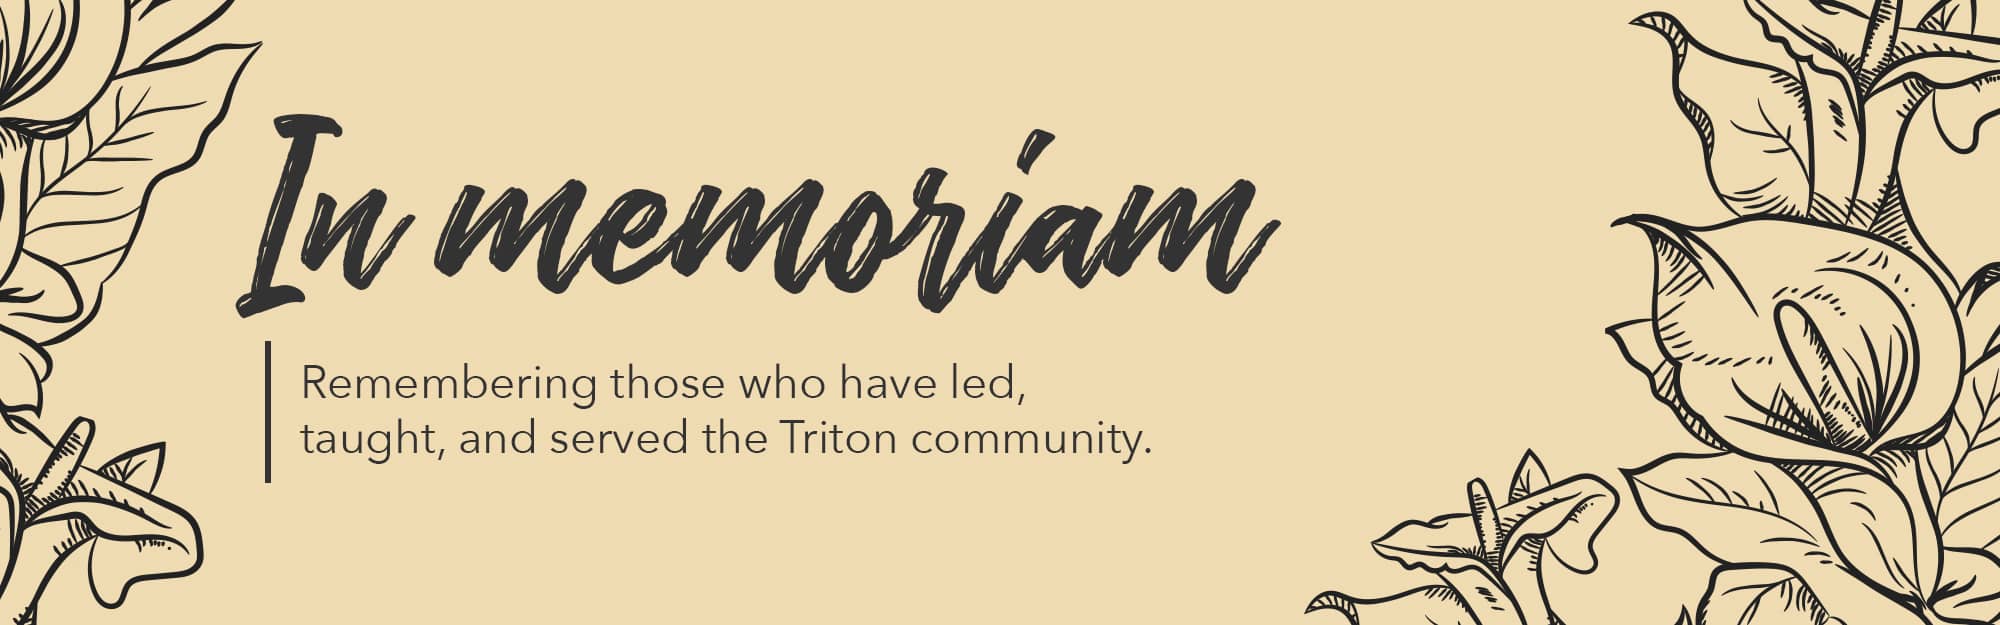 In memoriam: Remembering those who have led, taught, and served the Triton community.